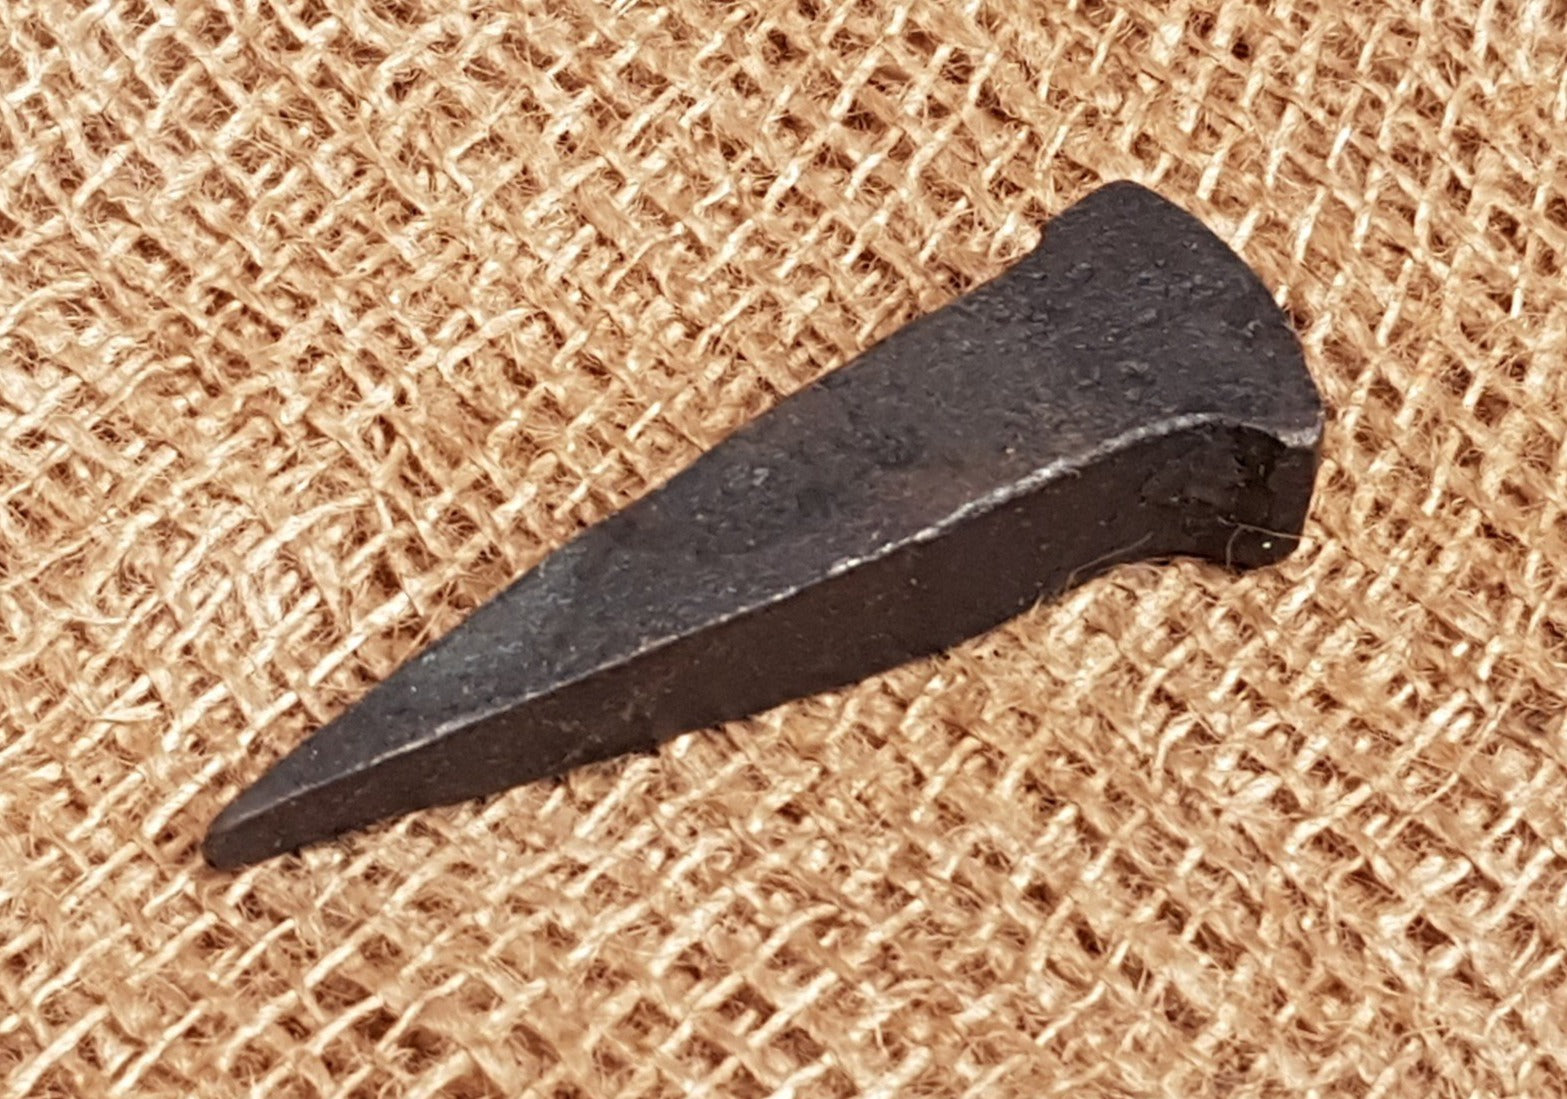 Railroad Spike - 3" - Spearhead Collection - Nails – Spikes – Studs - D.I.Y. - Do It Yourself Projects, Hardware, Industrial hardware, Railway, Spikes